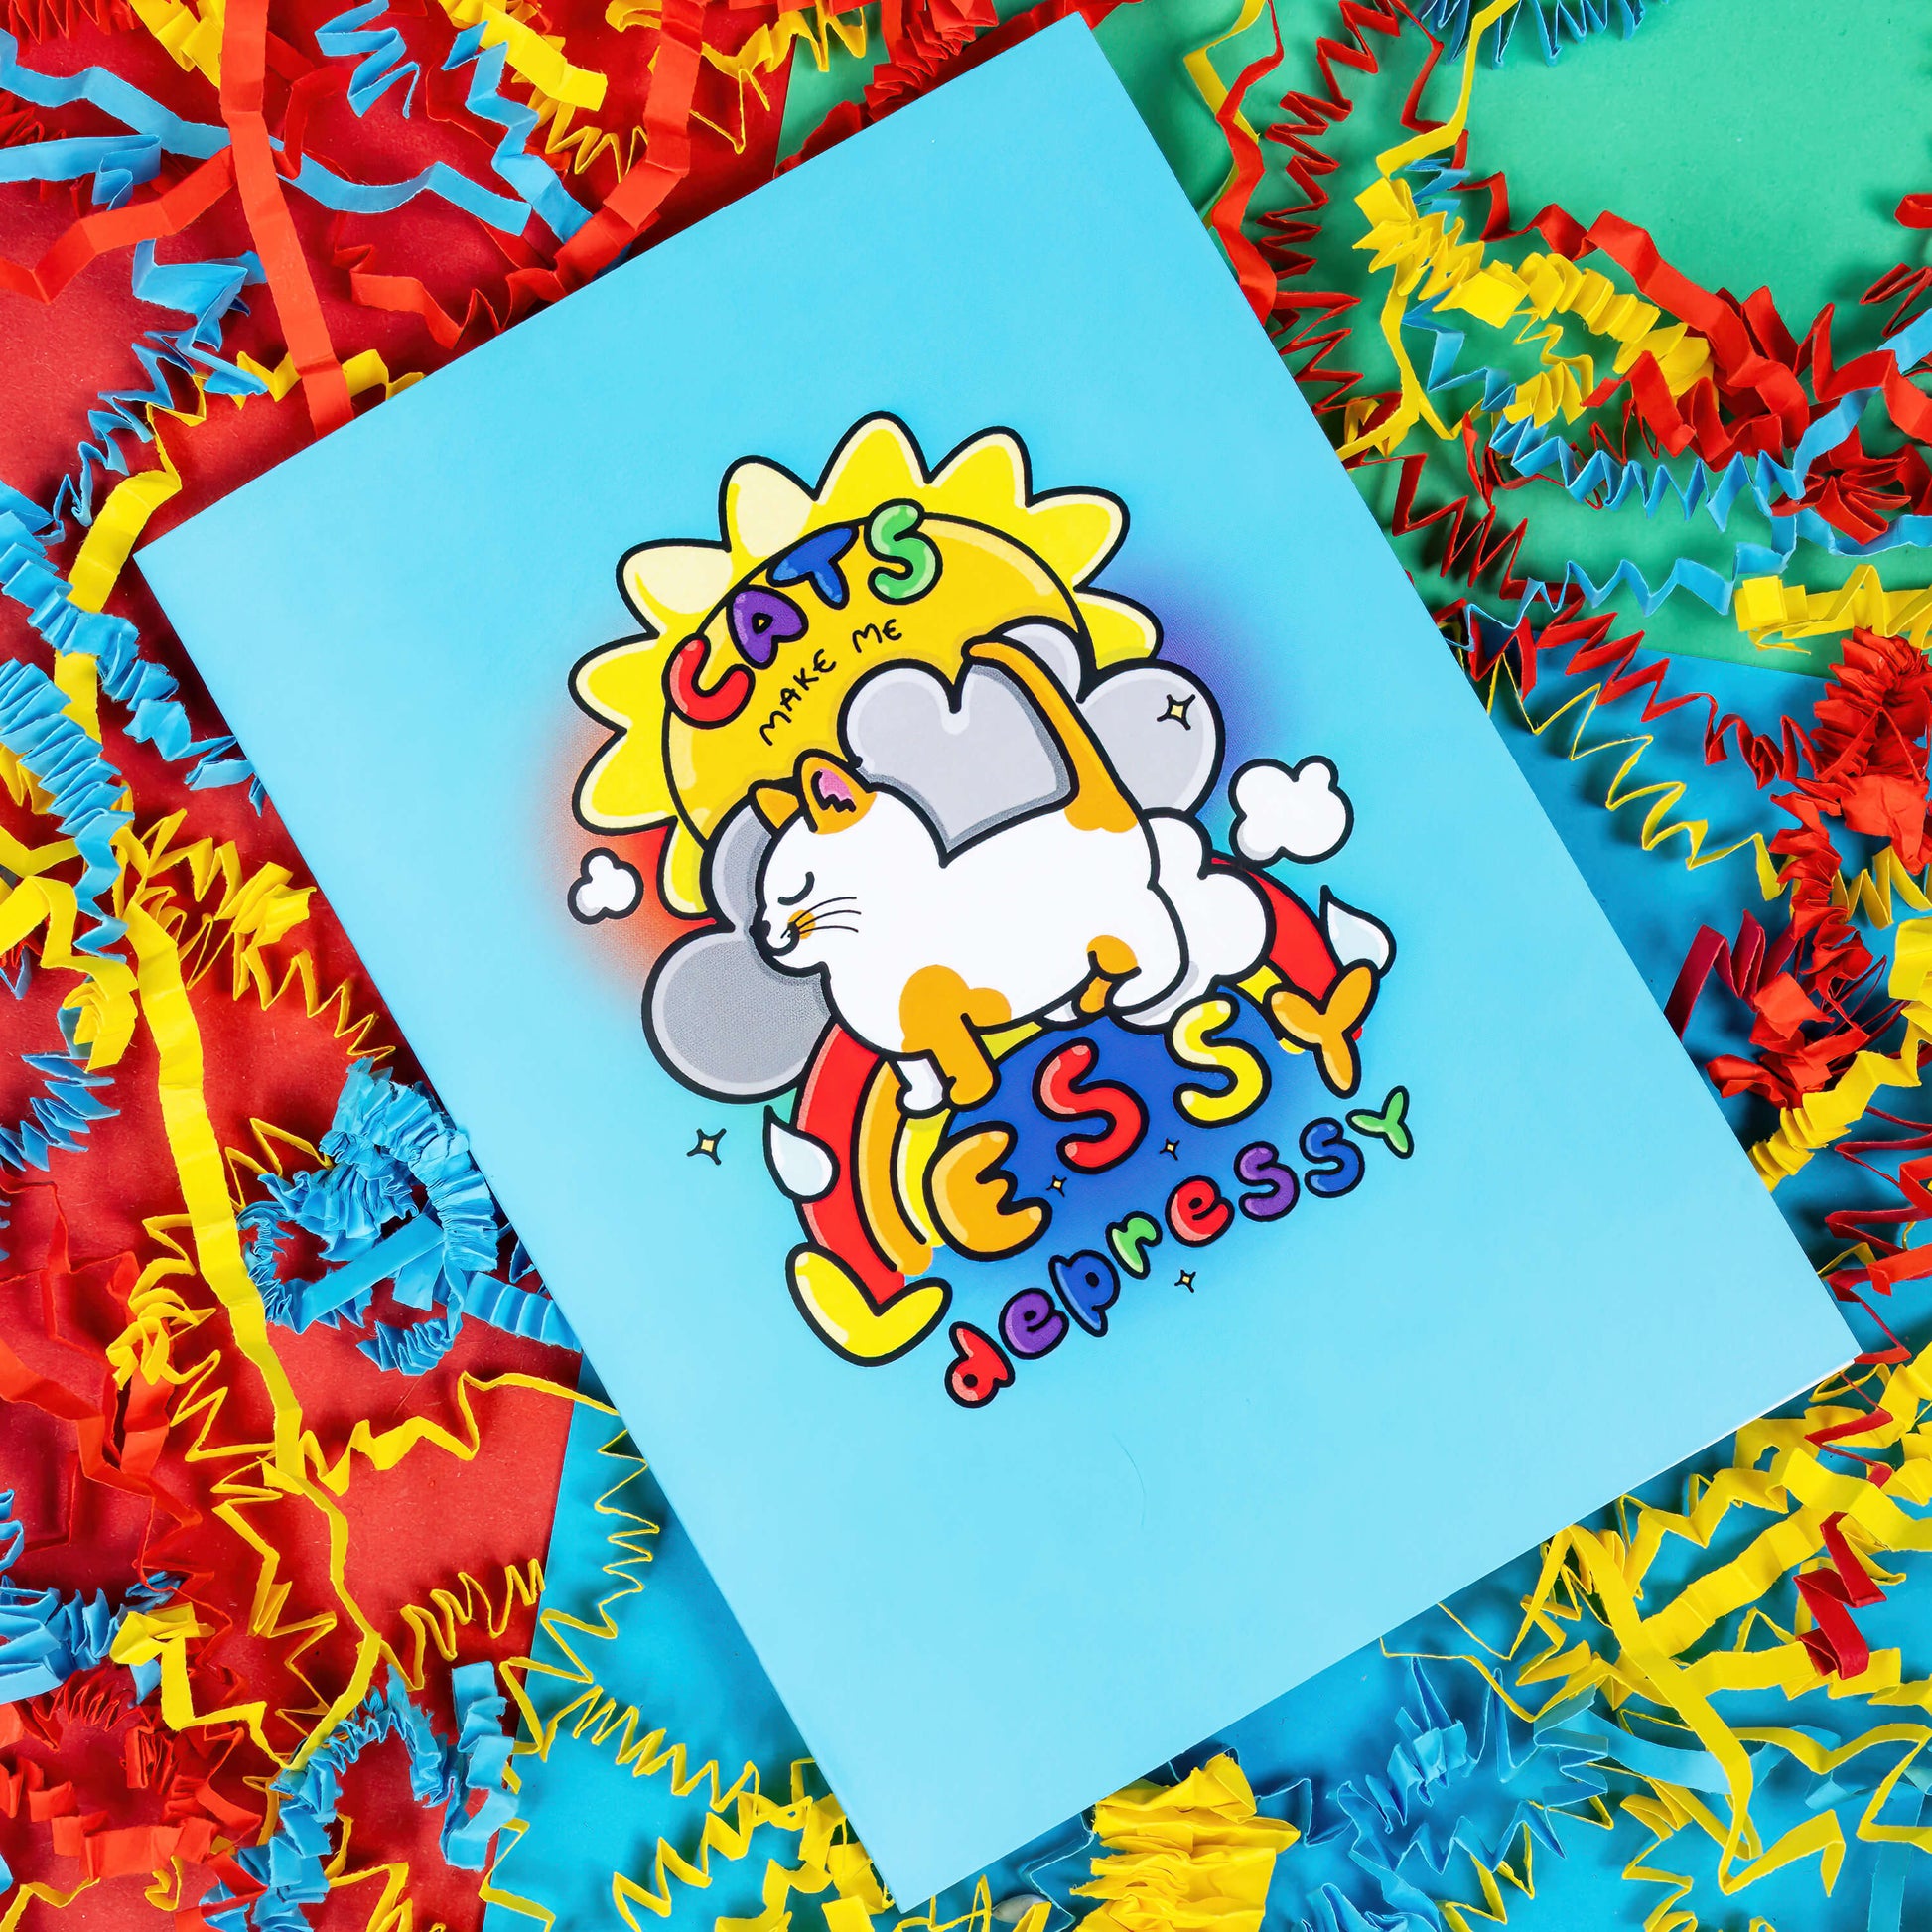 A light blue greeting card with an illustration of a happy ginger and white cat with a sun, clouds and rainbow behind it. 'Cats make me lessy depressy' is written on the card in rainbow bubble writing. The background of the photo is red, blue and yellow crinkle card confetti.